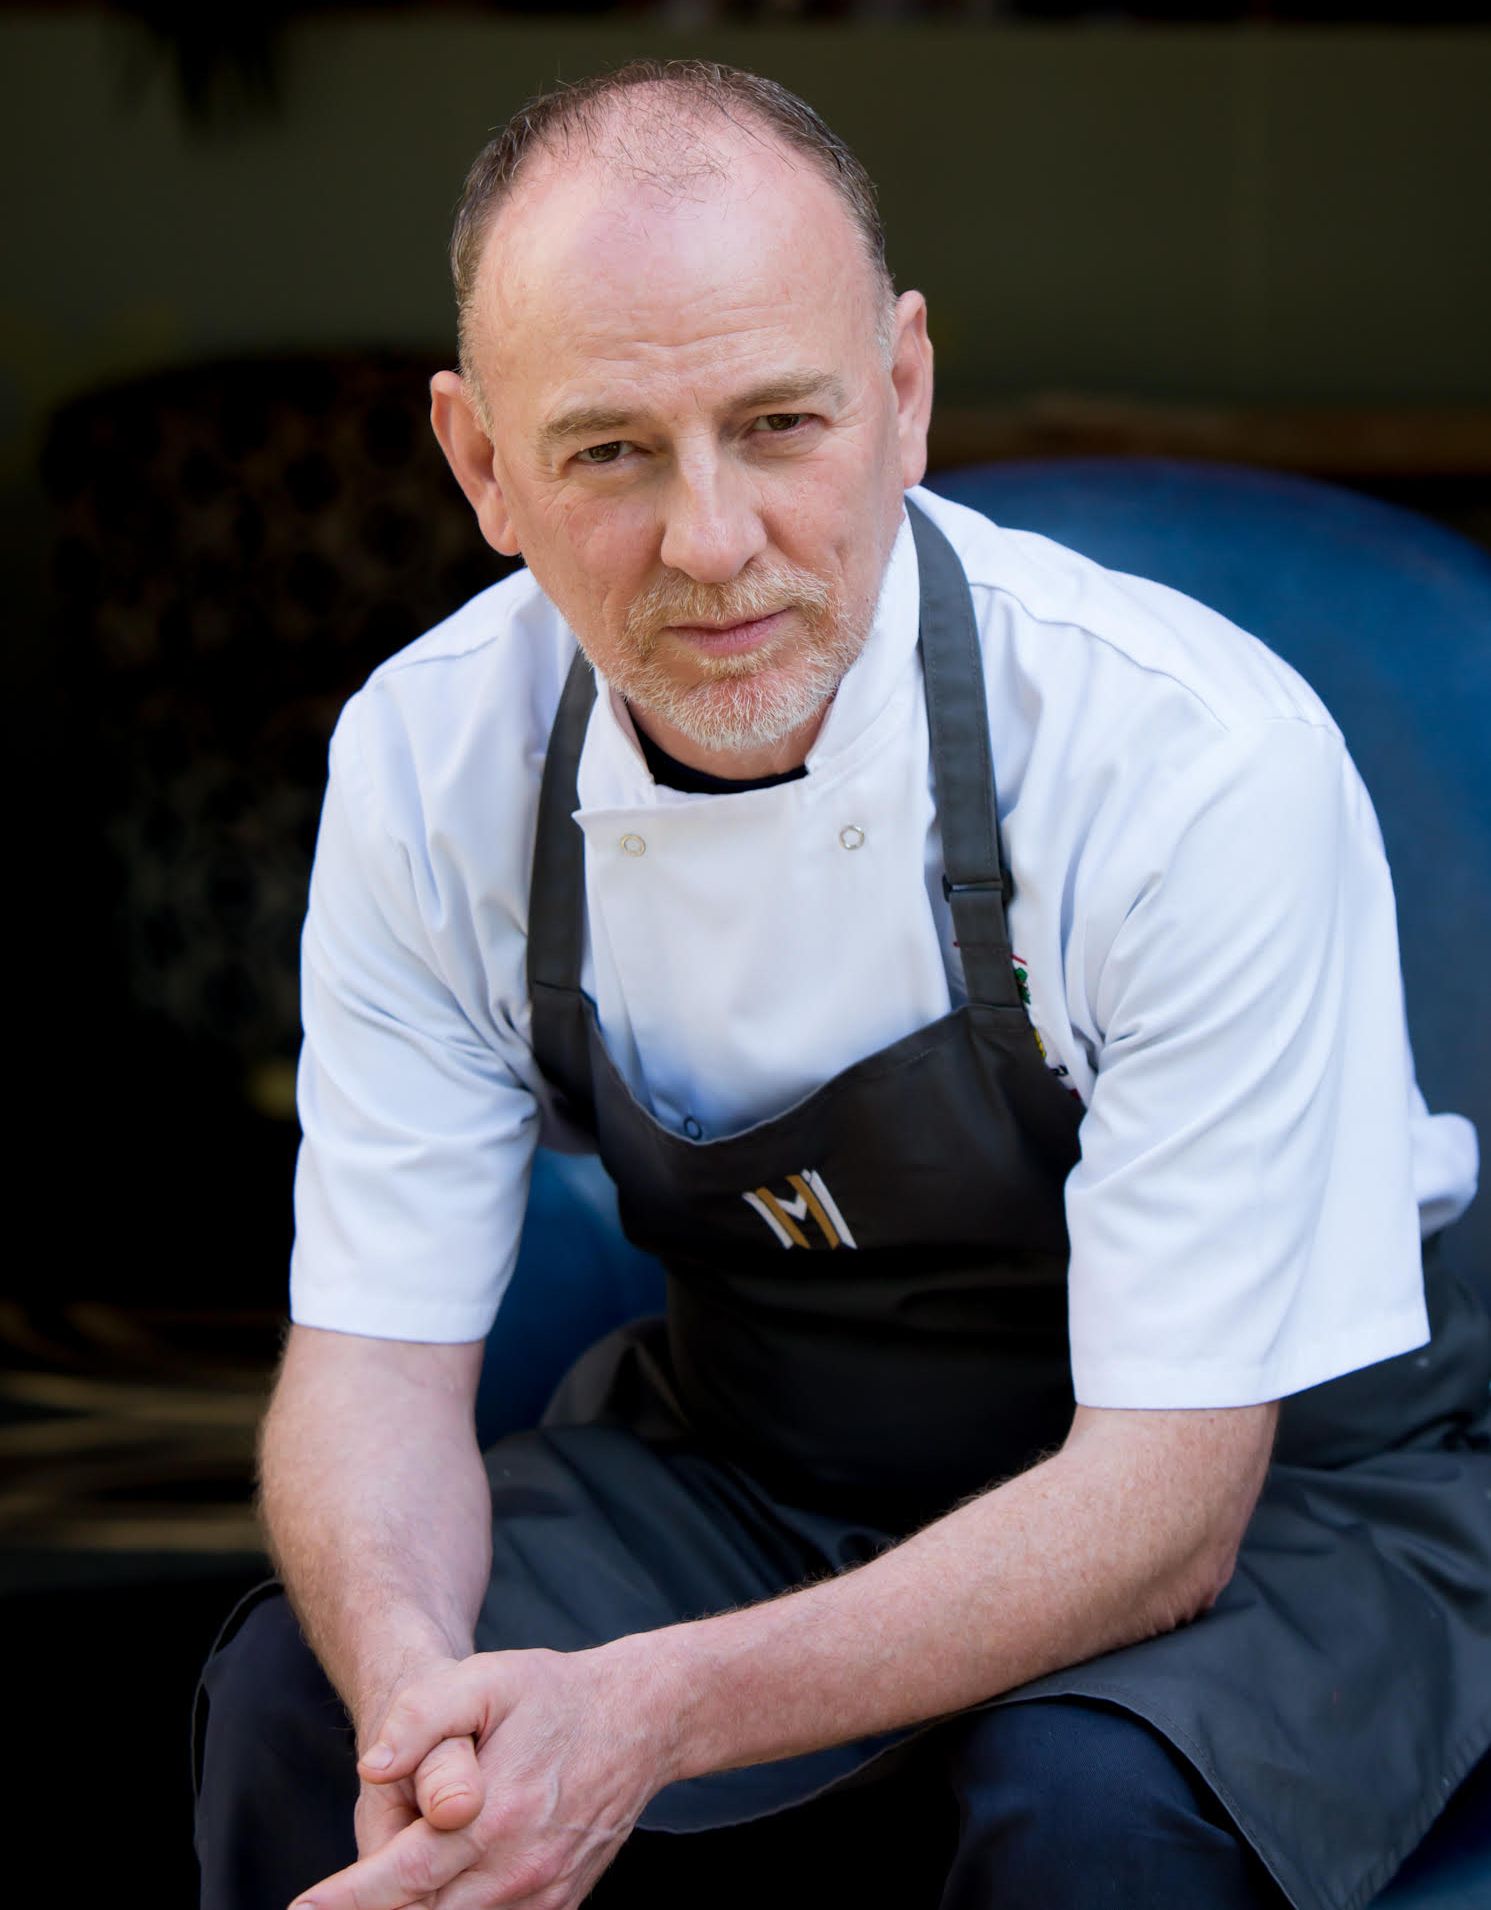 Award-winning chef, Colin Gannon has recently taken up position as Director of Food at The Grand, Southport, and Mikhail Hotels and Leisure Group.